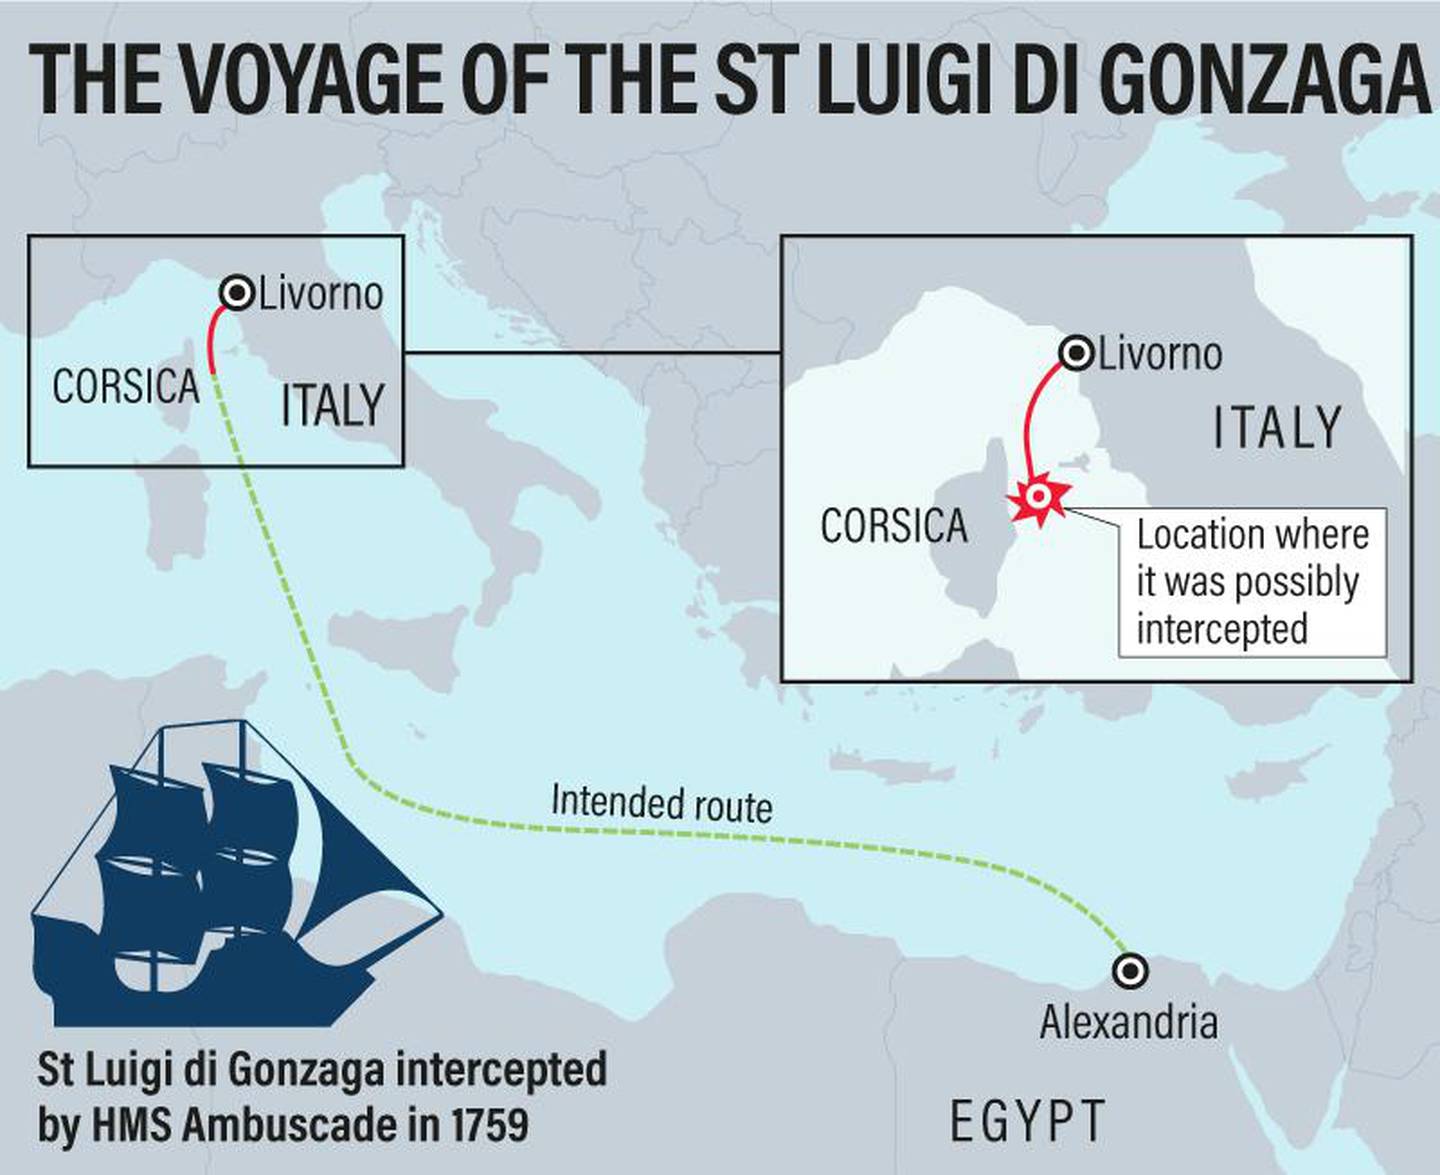 The voyage and interception of the St Luigi, which carried the correspondence of Arab merchants. Courtesy: Ramon Penas / The National